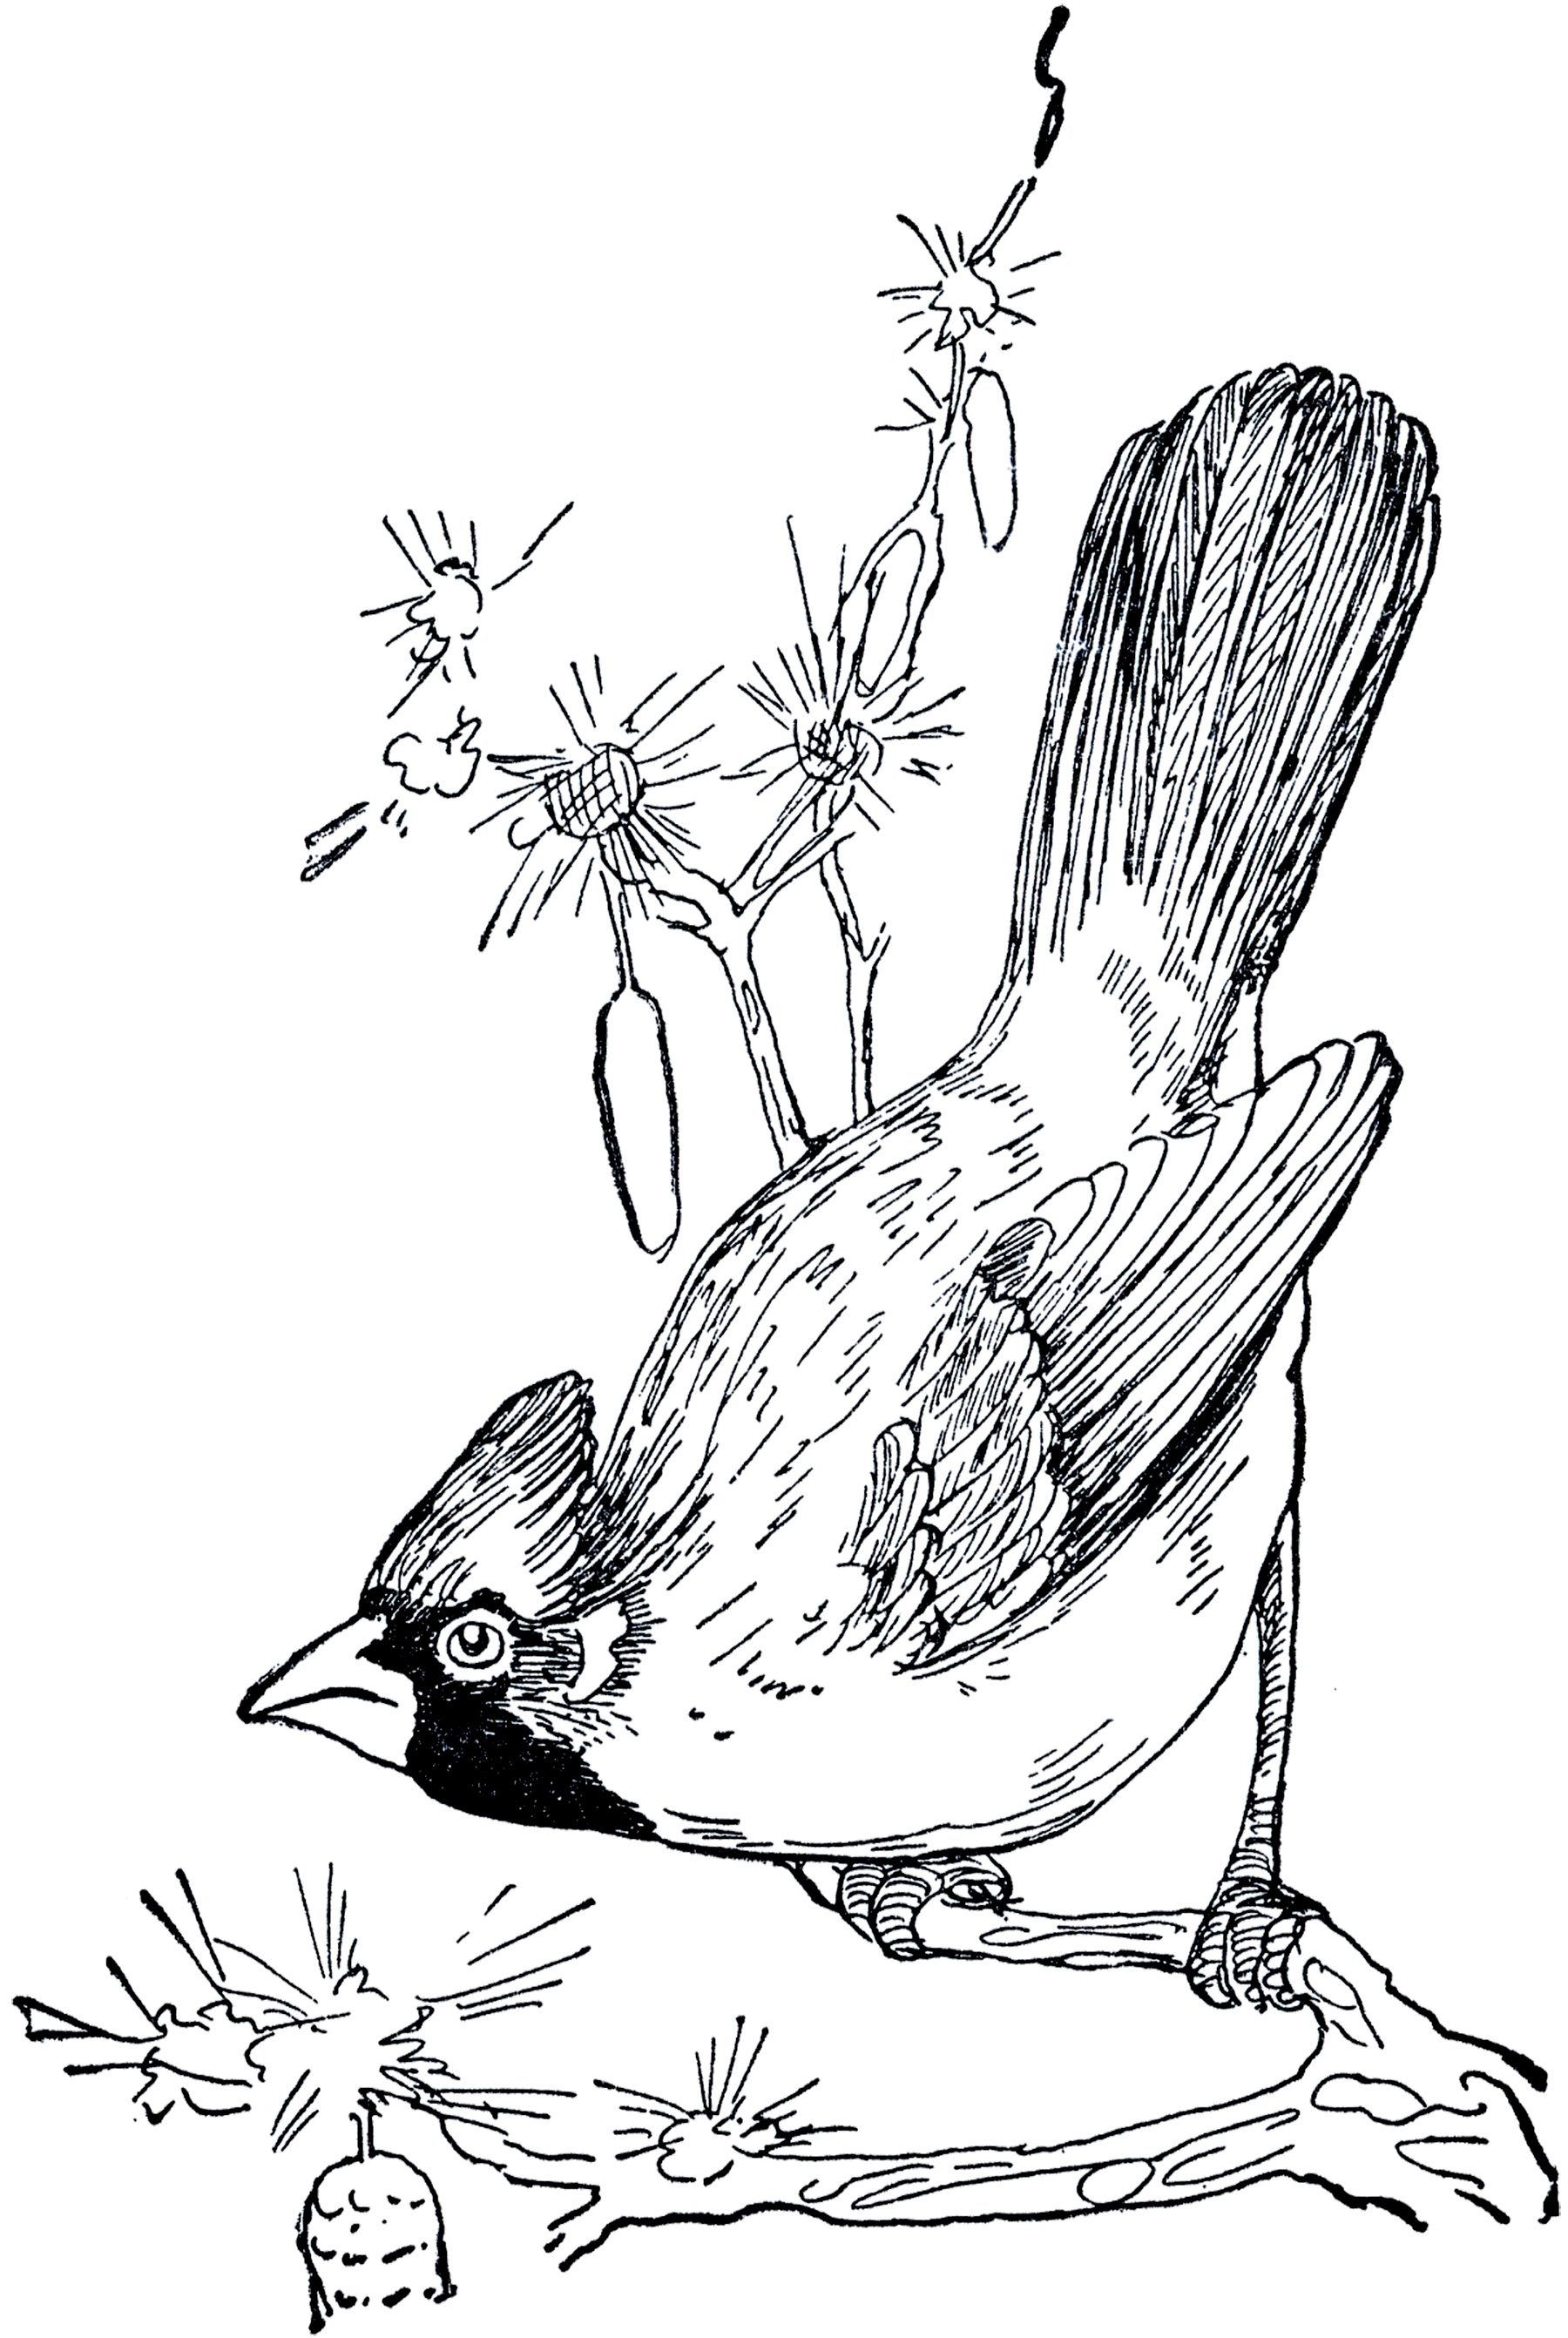 Vintage Cardinal Drawing - The Graphics Fairy